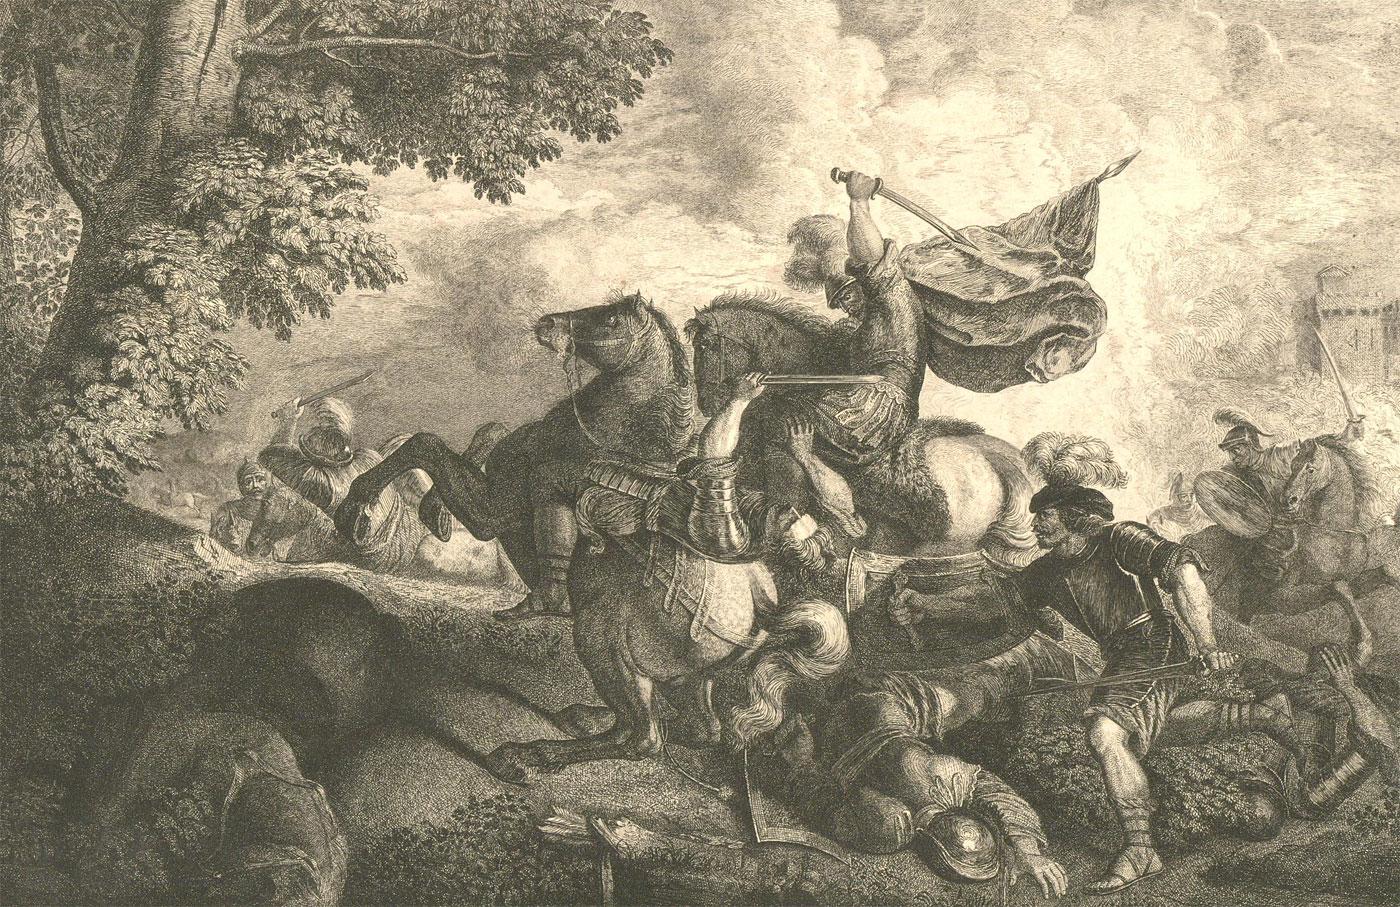 A dramatic 18th century engraving showing a brutal and bloody battle scene. The engraving is by Antoine de Marcenay de Ghuy, after Joseph Parrocel. There is an inscription at the lower edge with the artist's names, the publishing details and date